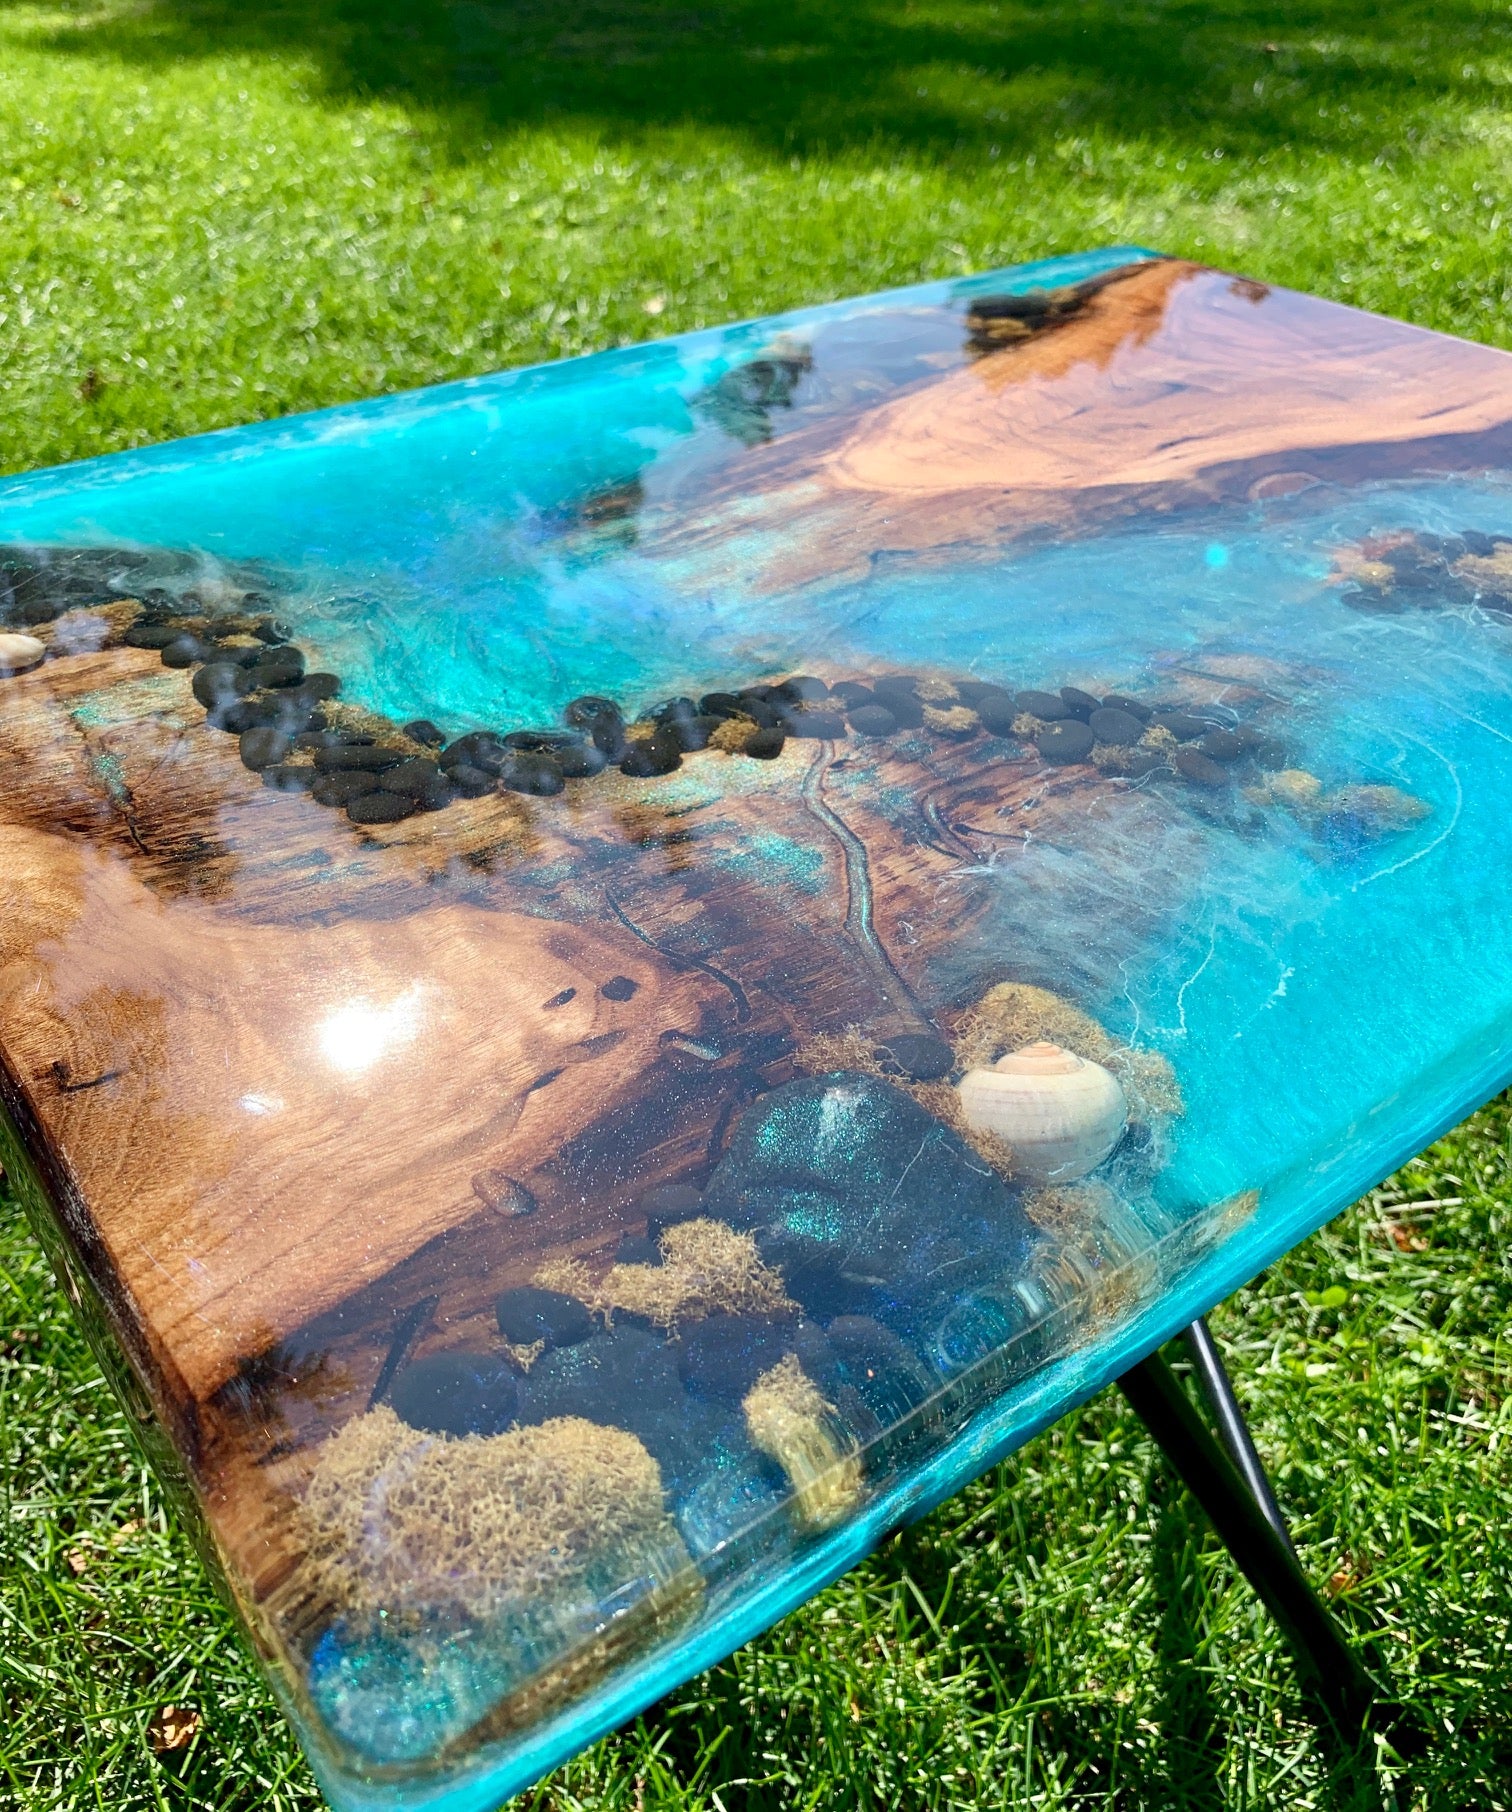 The Simple Tips To Embedding Transparencies In Resin - Resin Obsession